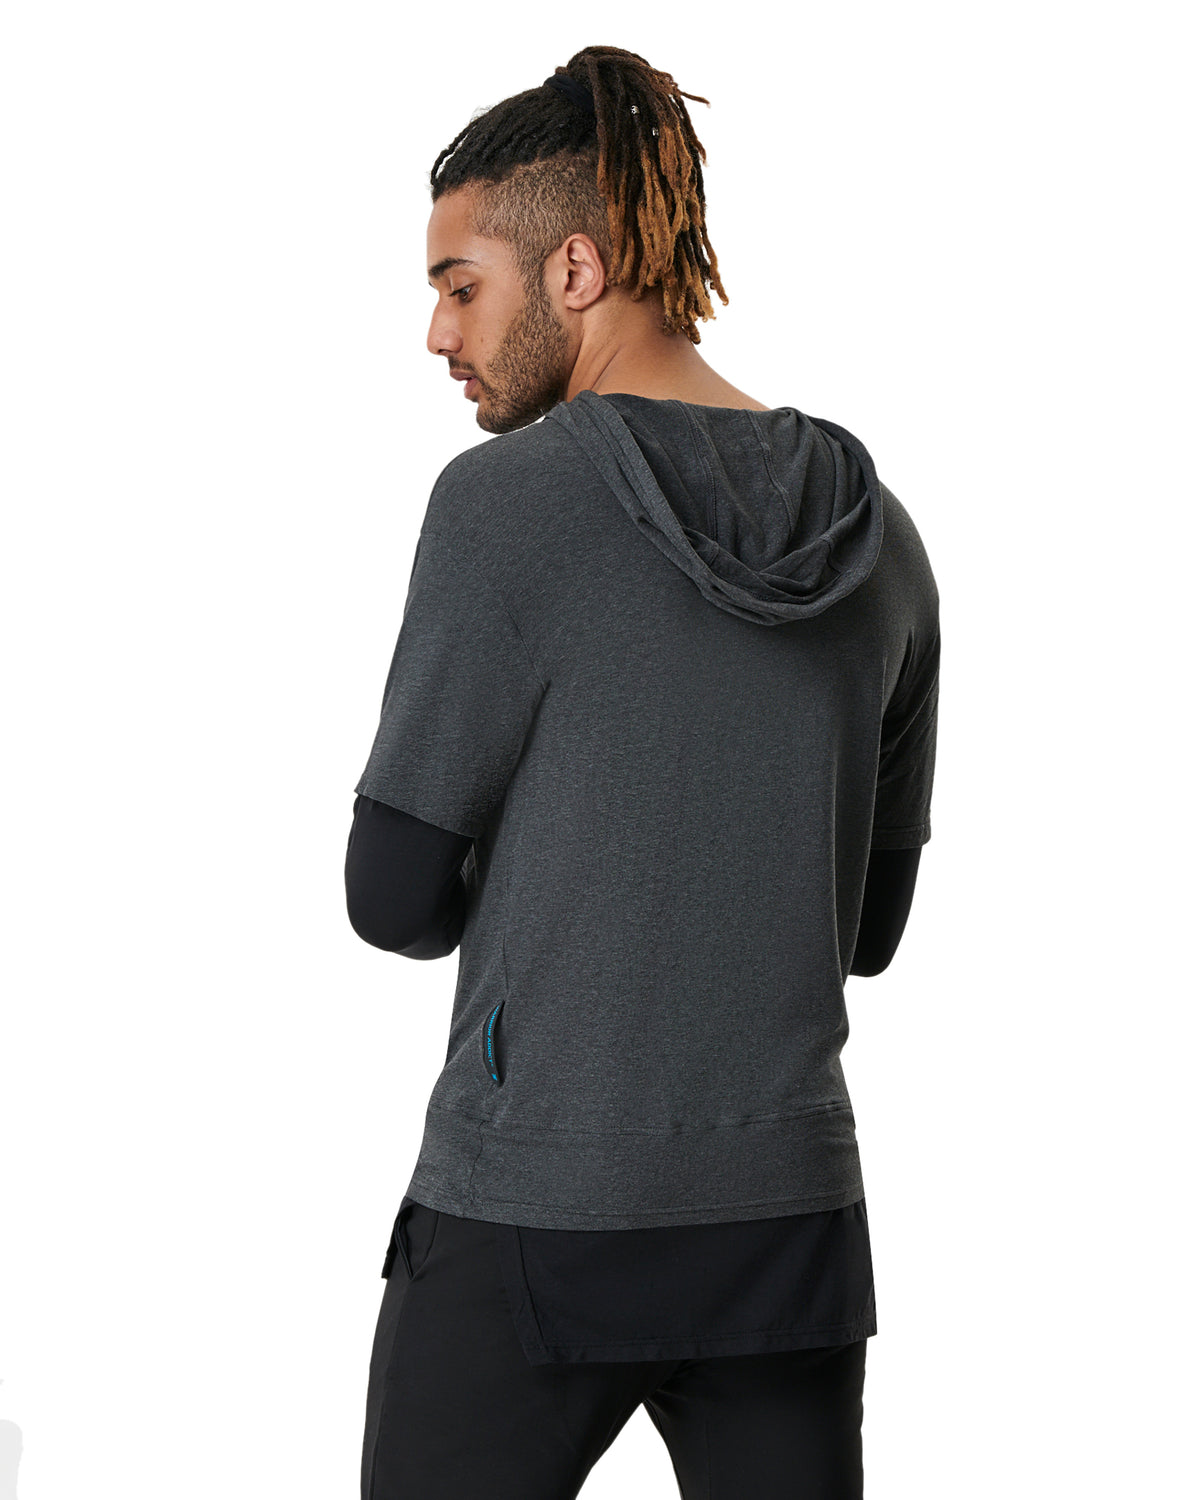 back view mens yoga hoodie in grey by warrior addict